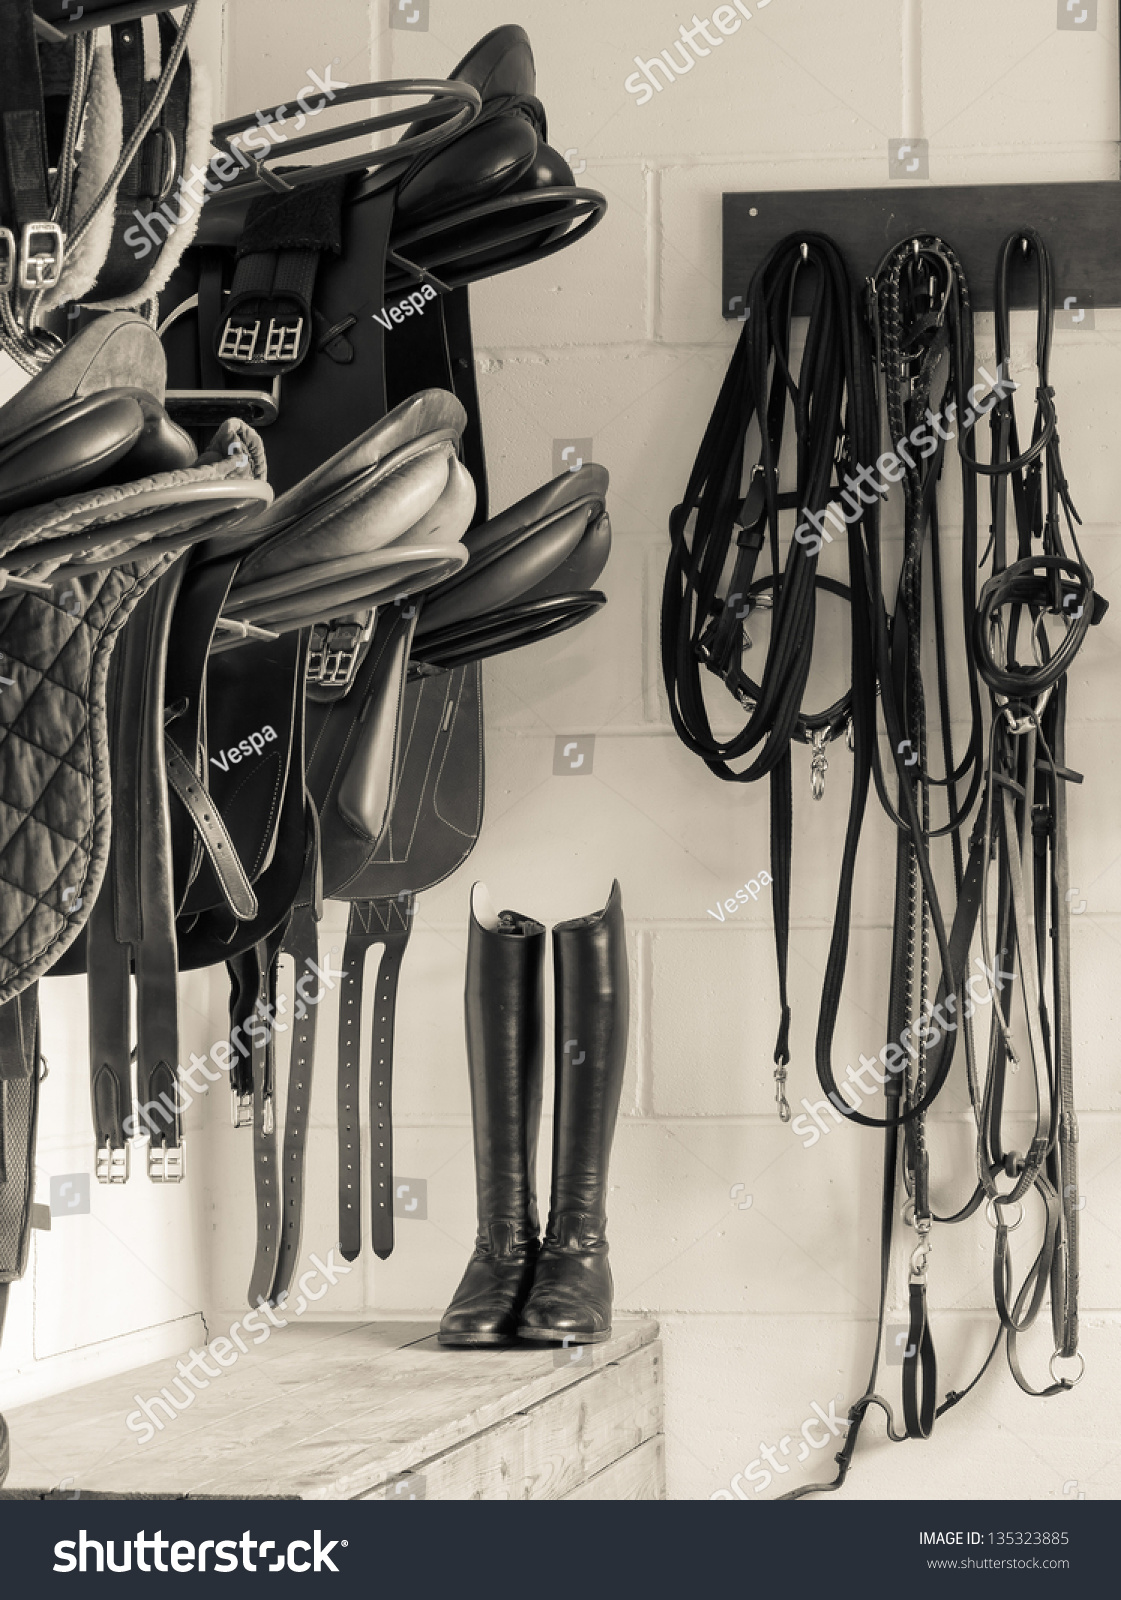 Tack Room Stock Photo Edit Now 135323885